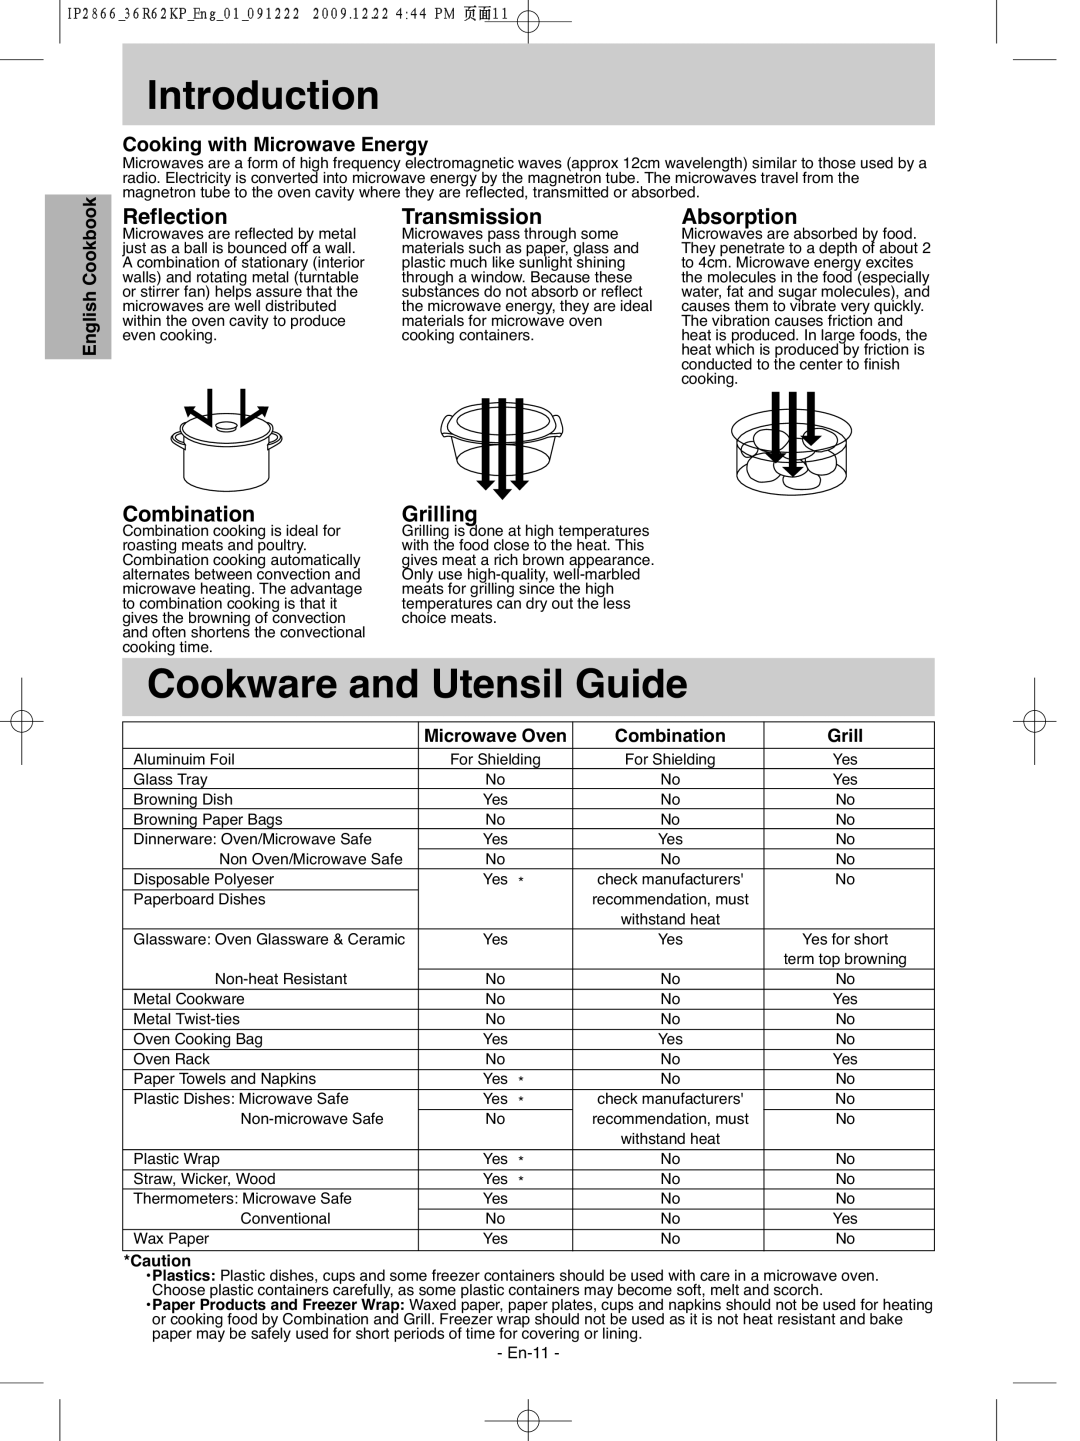 Panasonic NN-G335WF Introduction, Cookware and Utensil Guide, Reflection, Transmission, Absorption, Combination, Grilling 